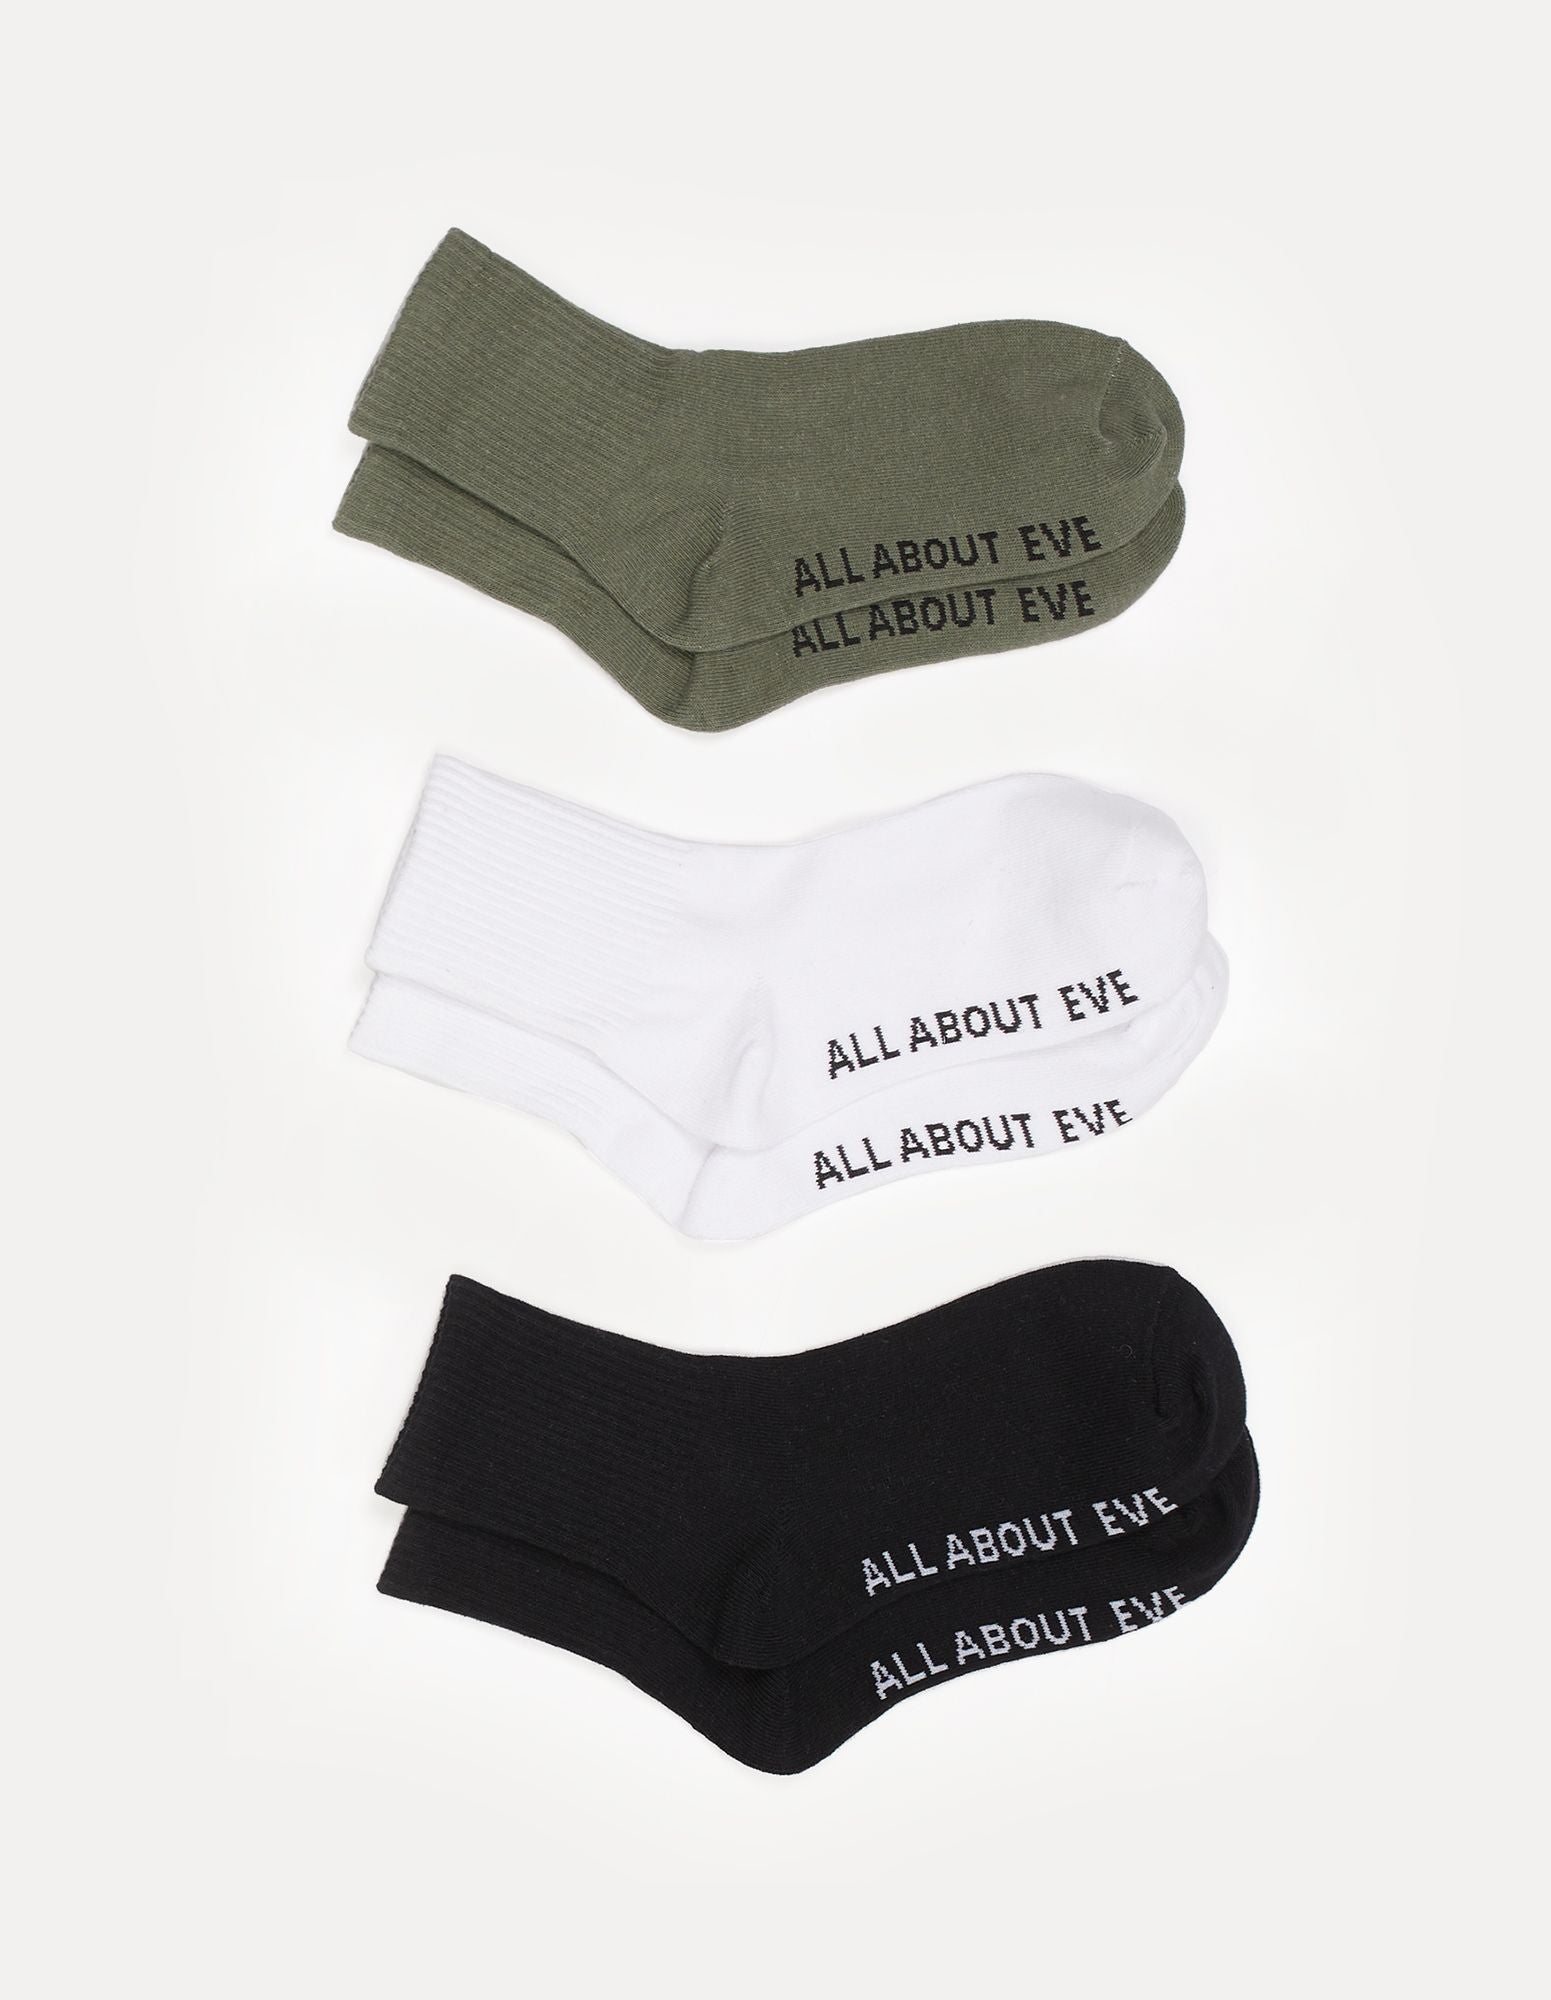 AAE Ankle Socks 3Pk - Khaki/White/Black - All About Eve - FUDGE Gifts Home Lifestyle